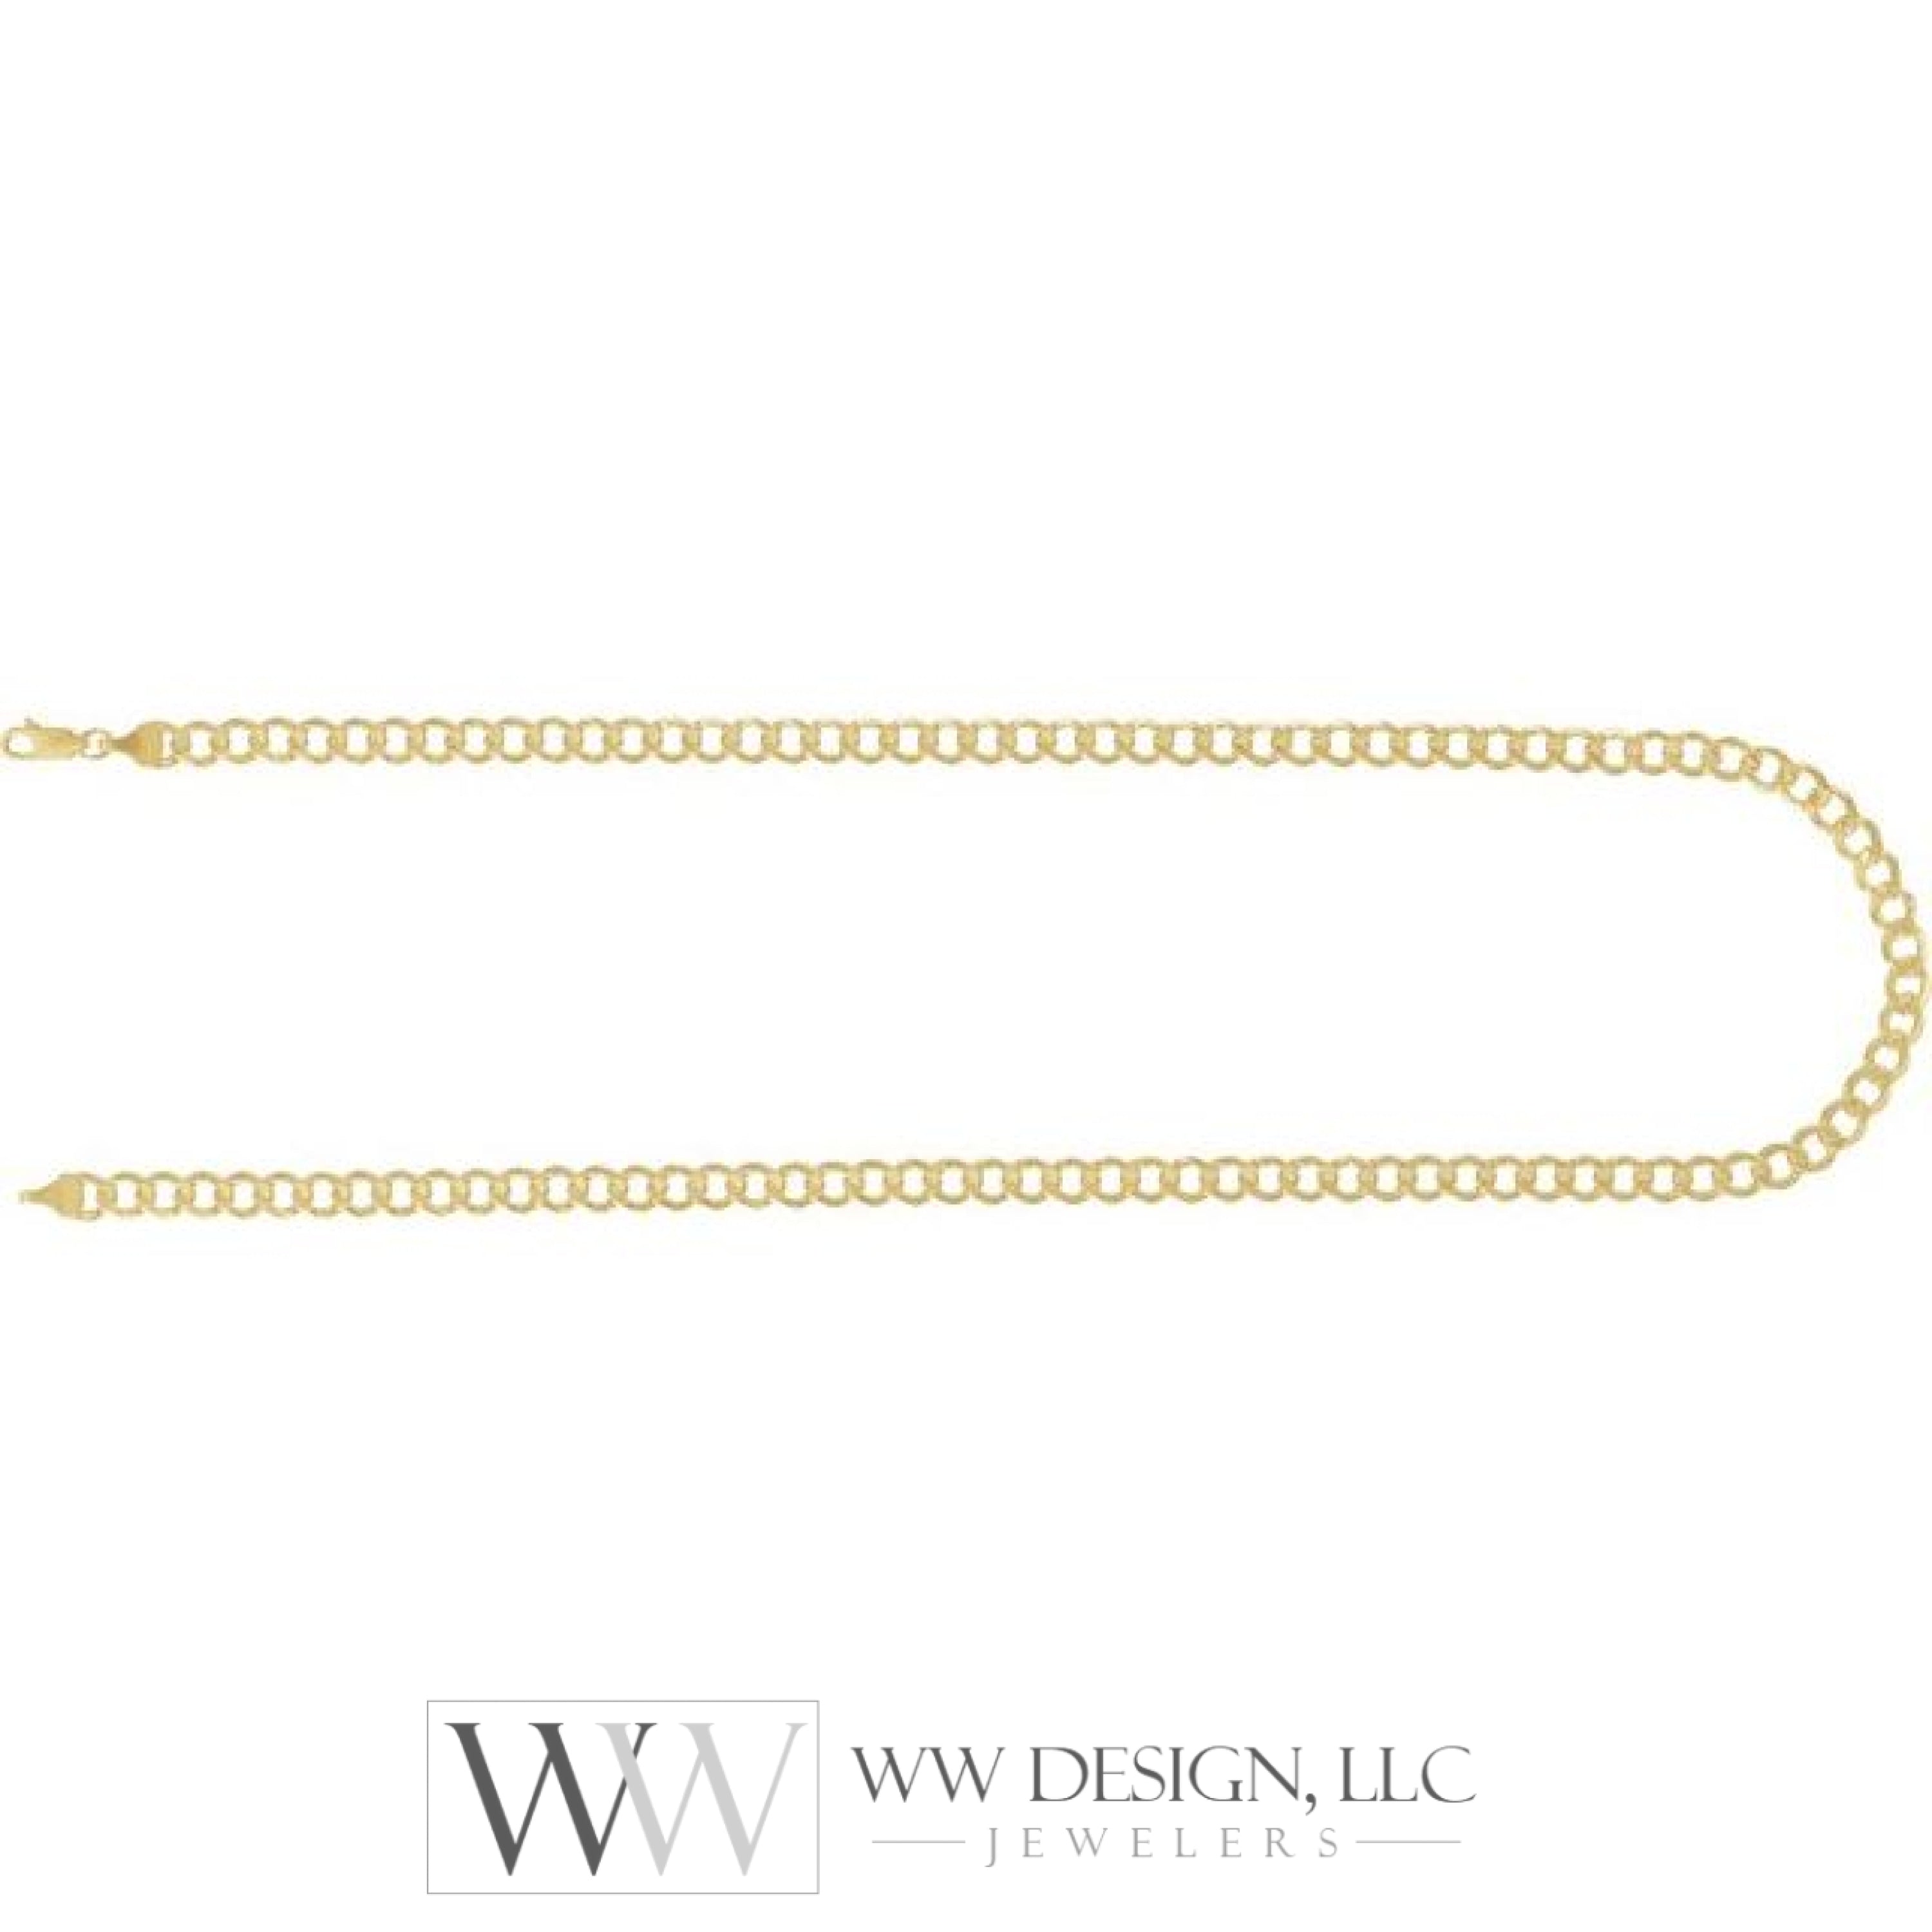 5.3mm Hollow Curb Chain Bracelet or Necklace - 14k Yellow Gold